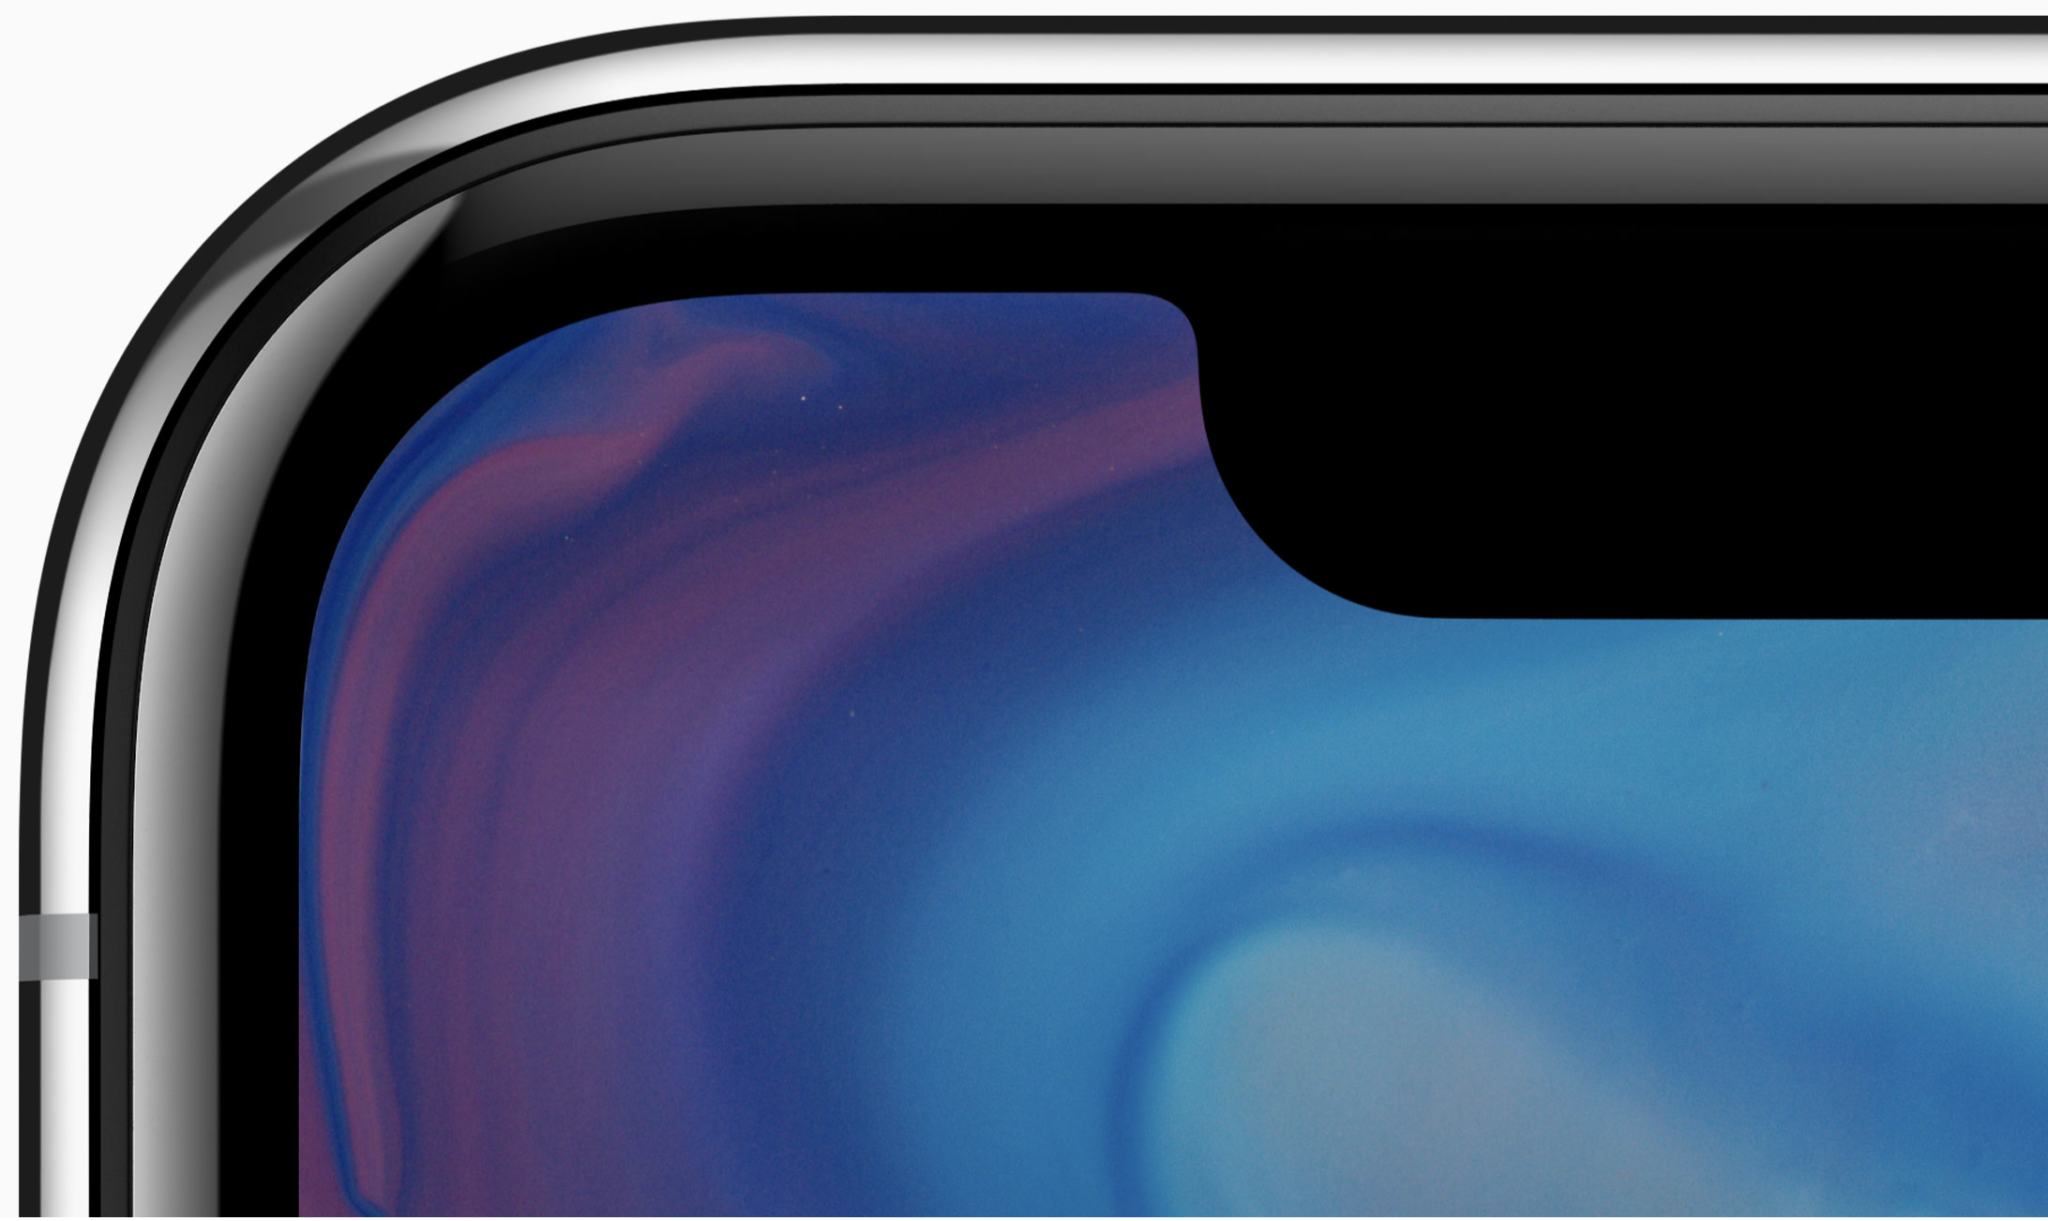 iPhone X Curved Screen and Notch